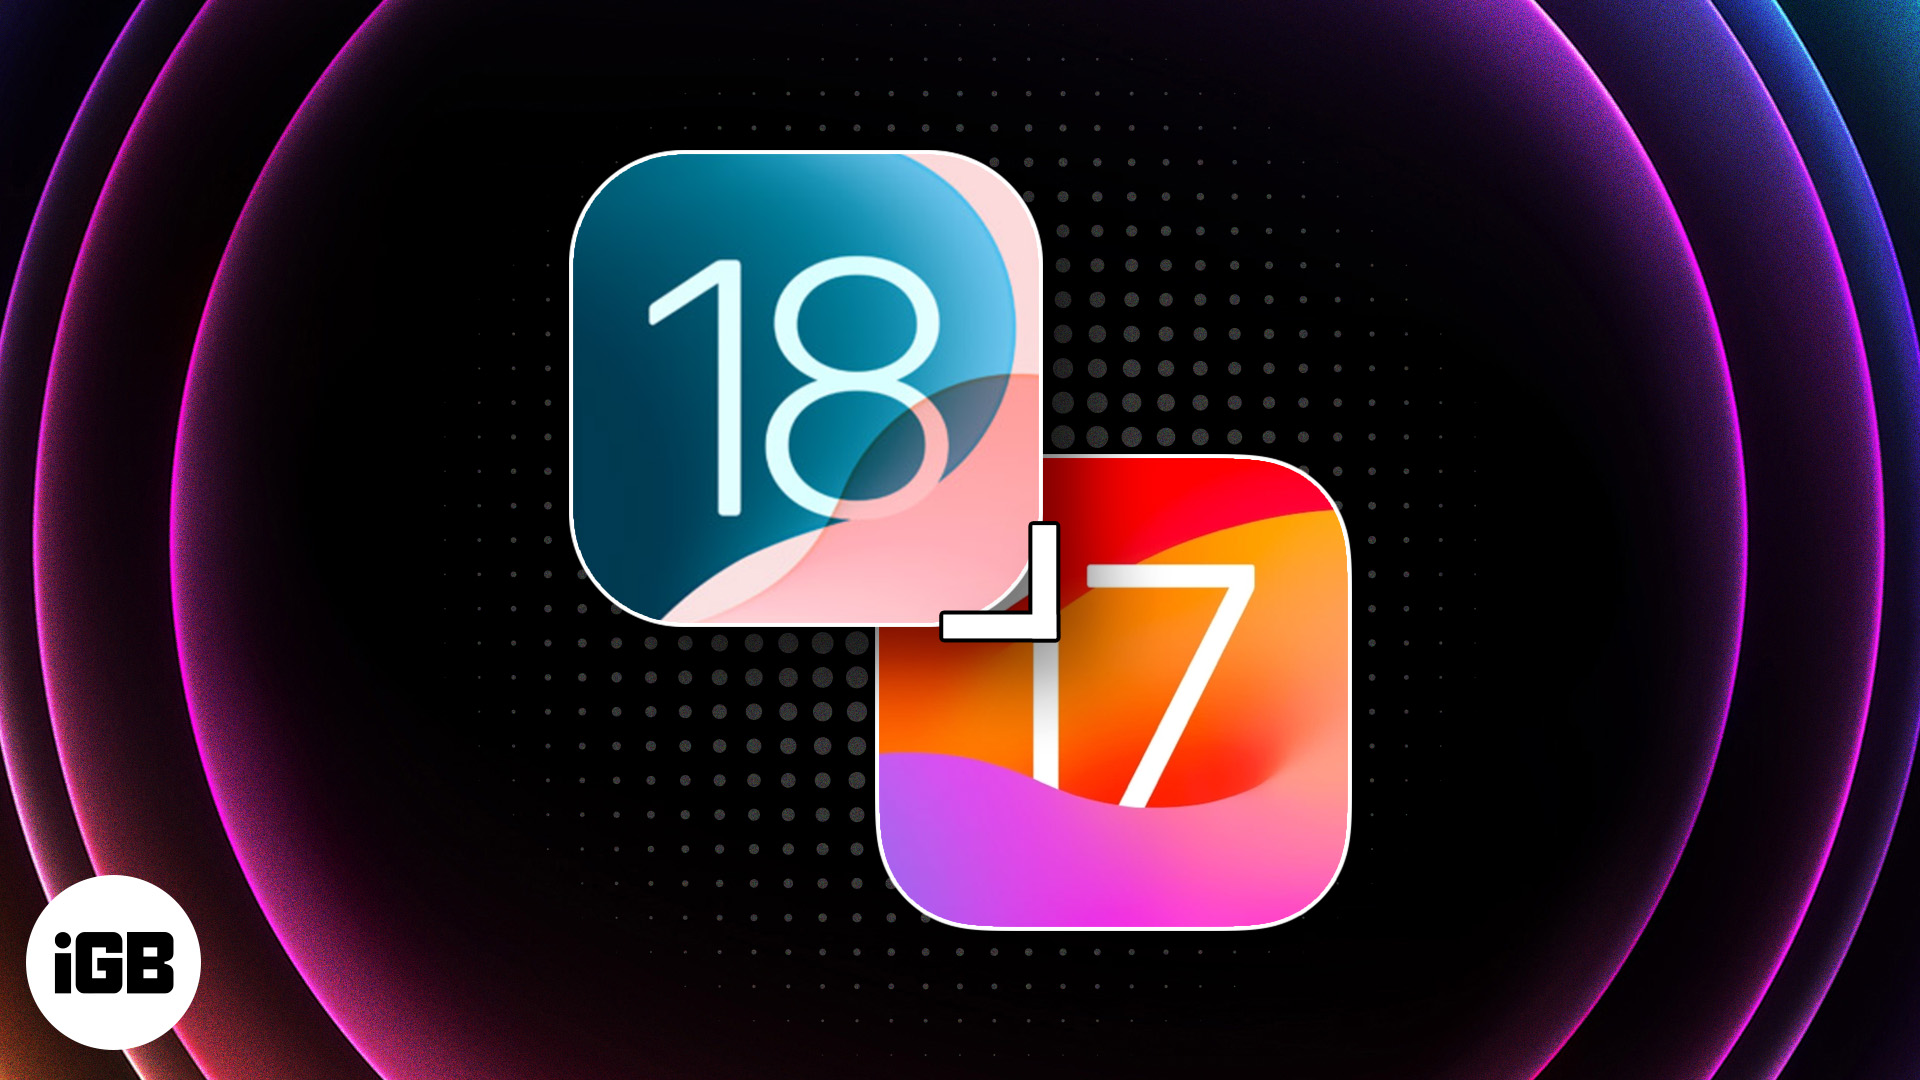 How to downgrade iOS 18 Beta to iOS 17 without losing data